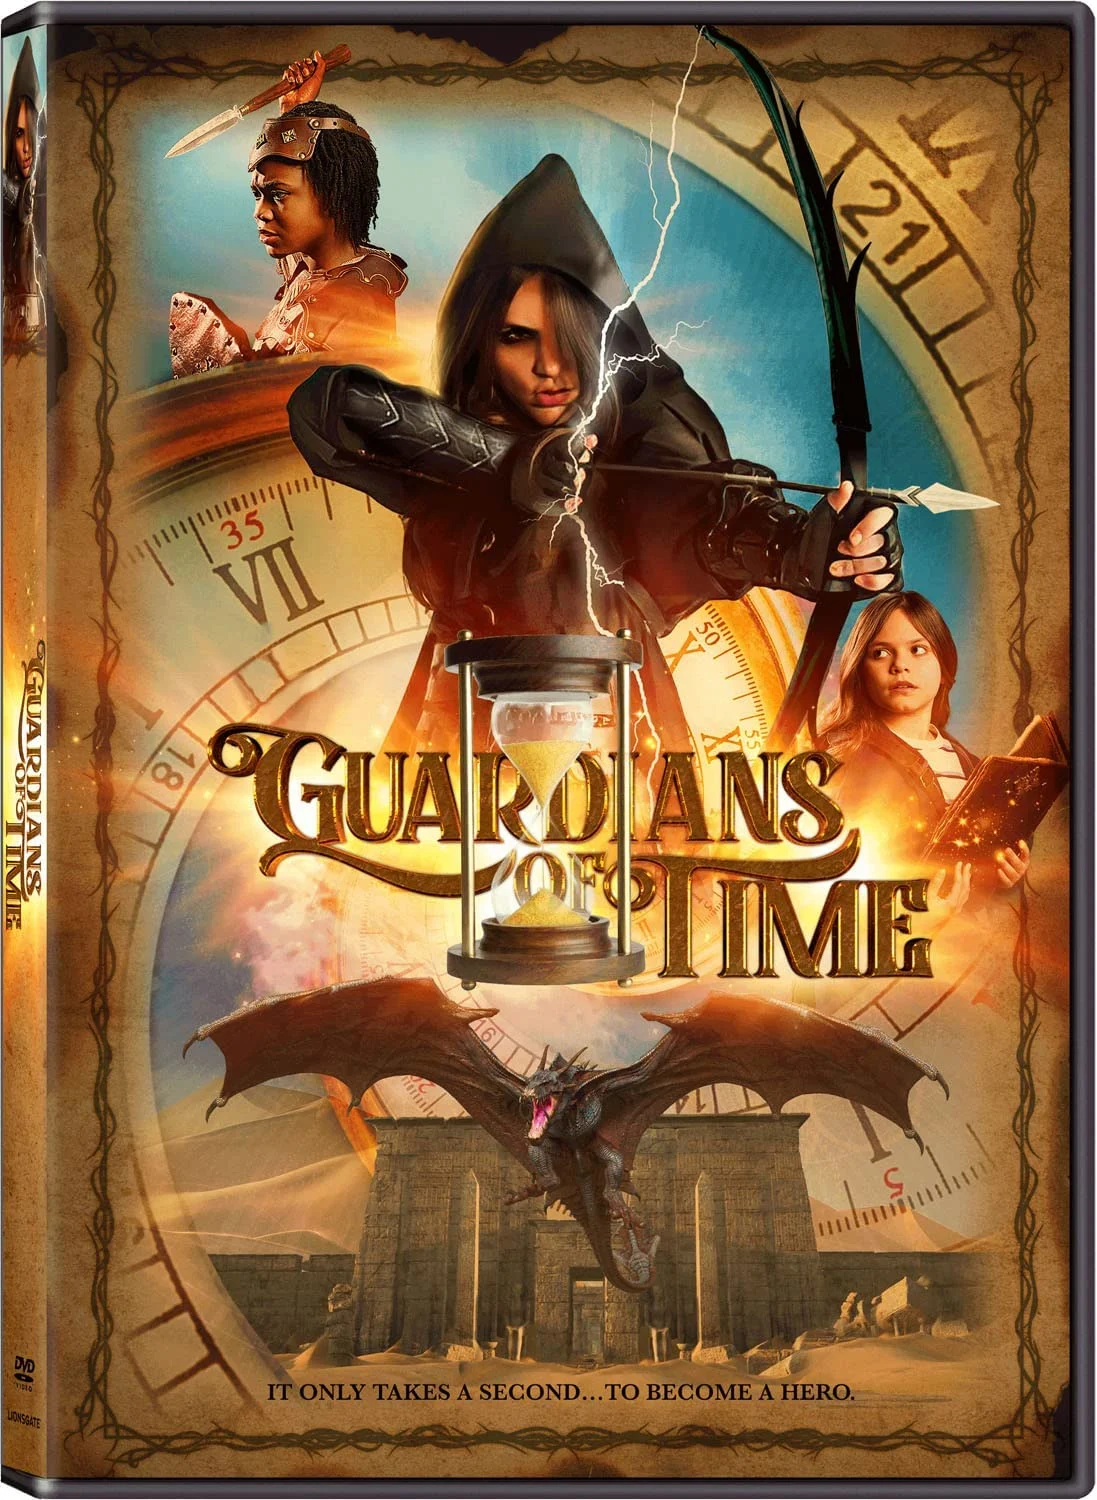 Guardians of Time (DVD) on MovieShack